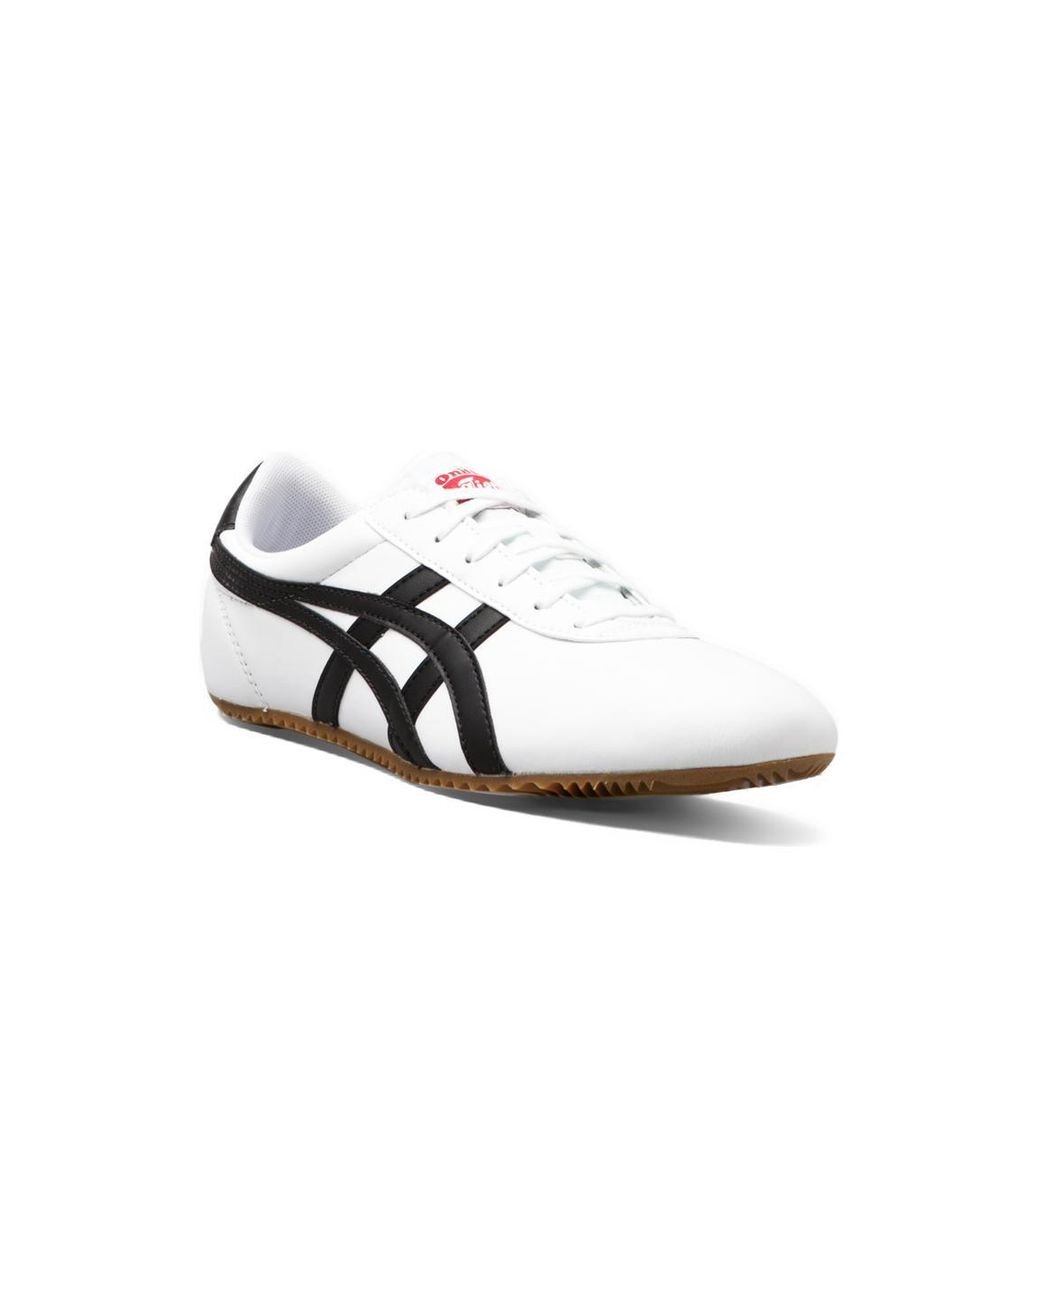 Onitsuka Tiger Tai Chi Le in White | Lyst